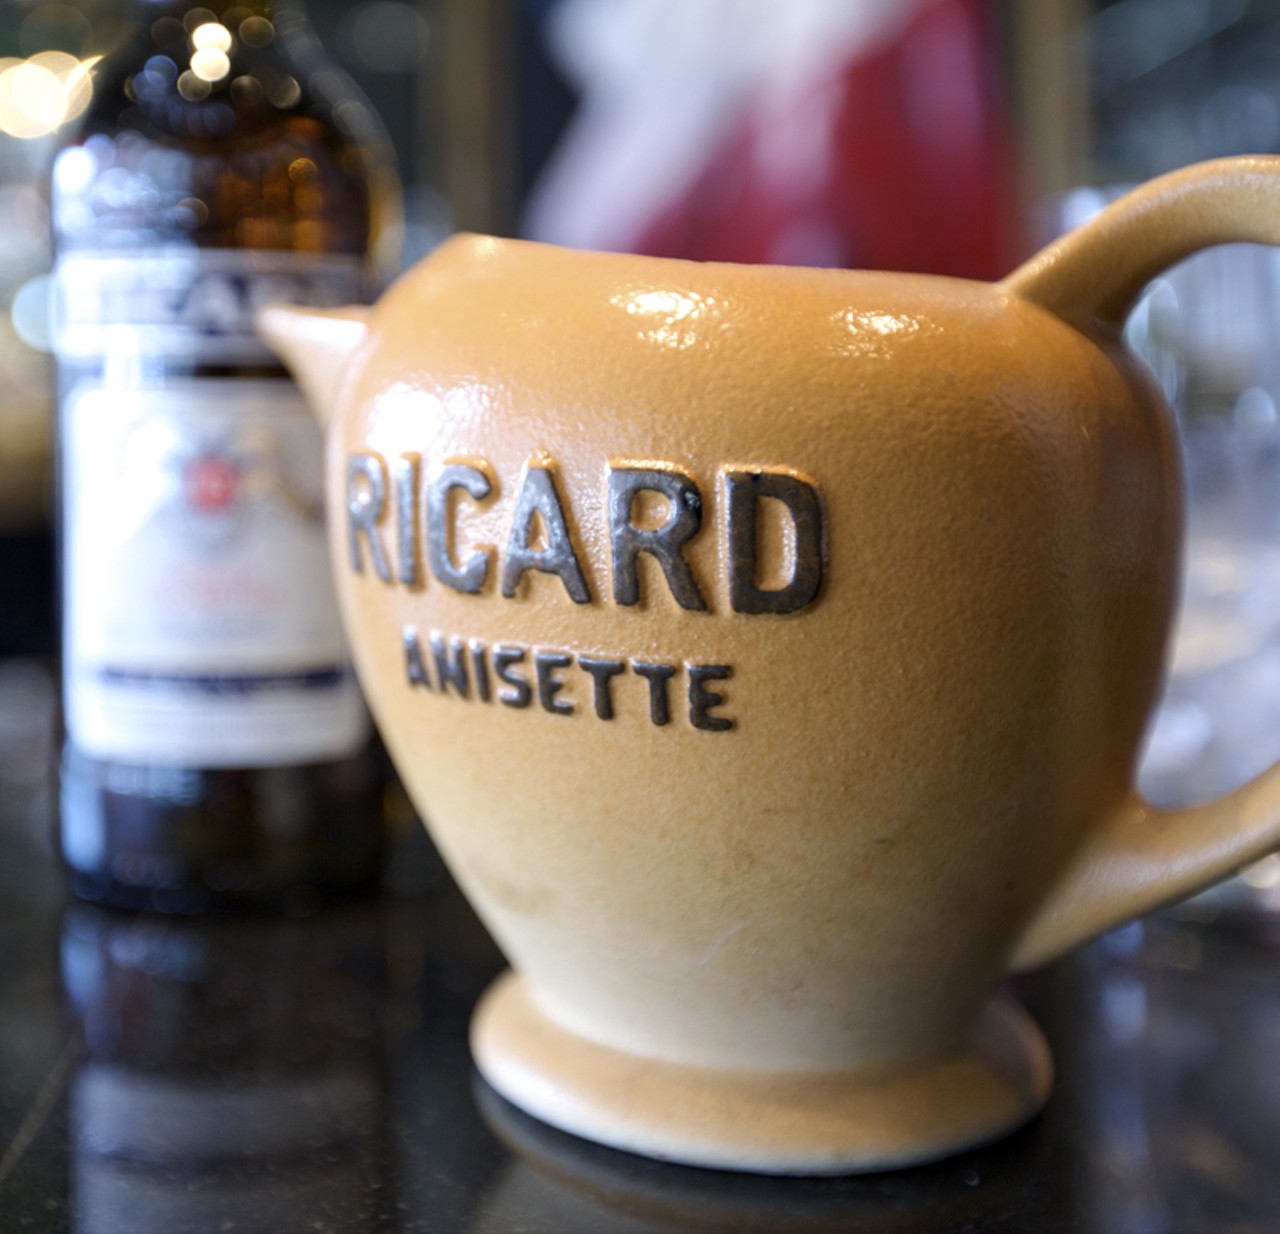 The Ricard Anisette is a vintage pastis that sits at the bar. A pastis is a water pitcher that is served alongside a bottle of Ricard.